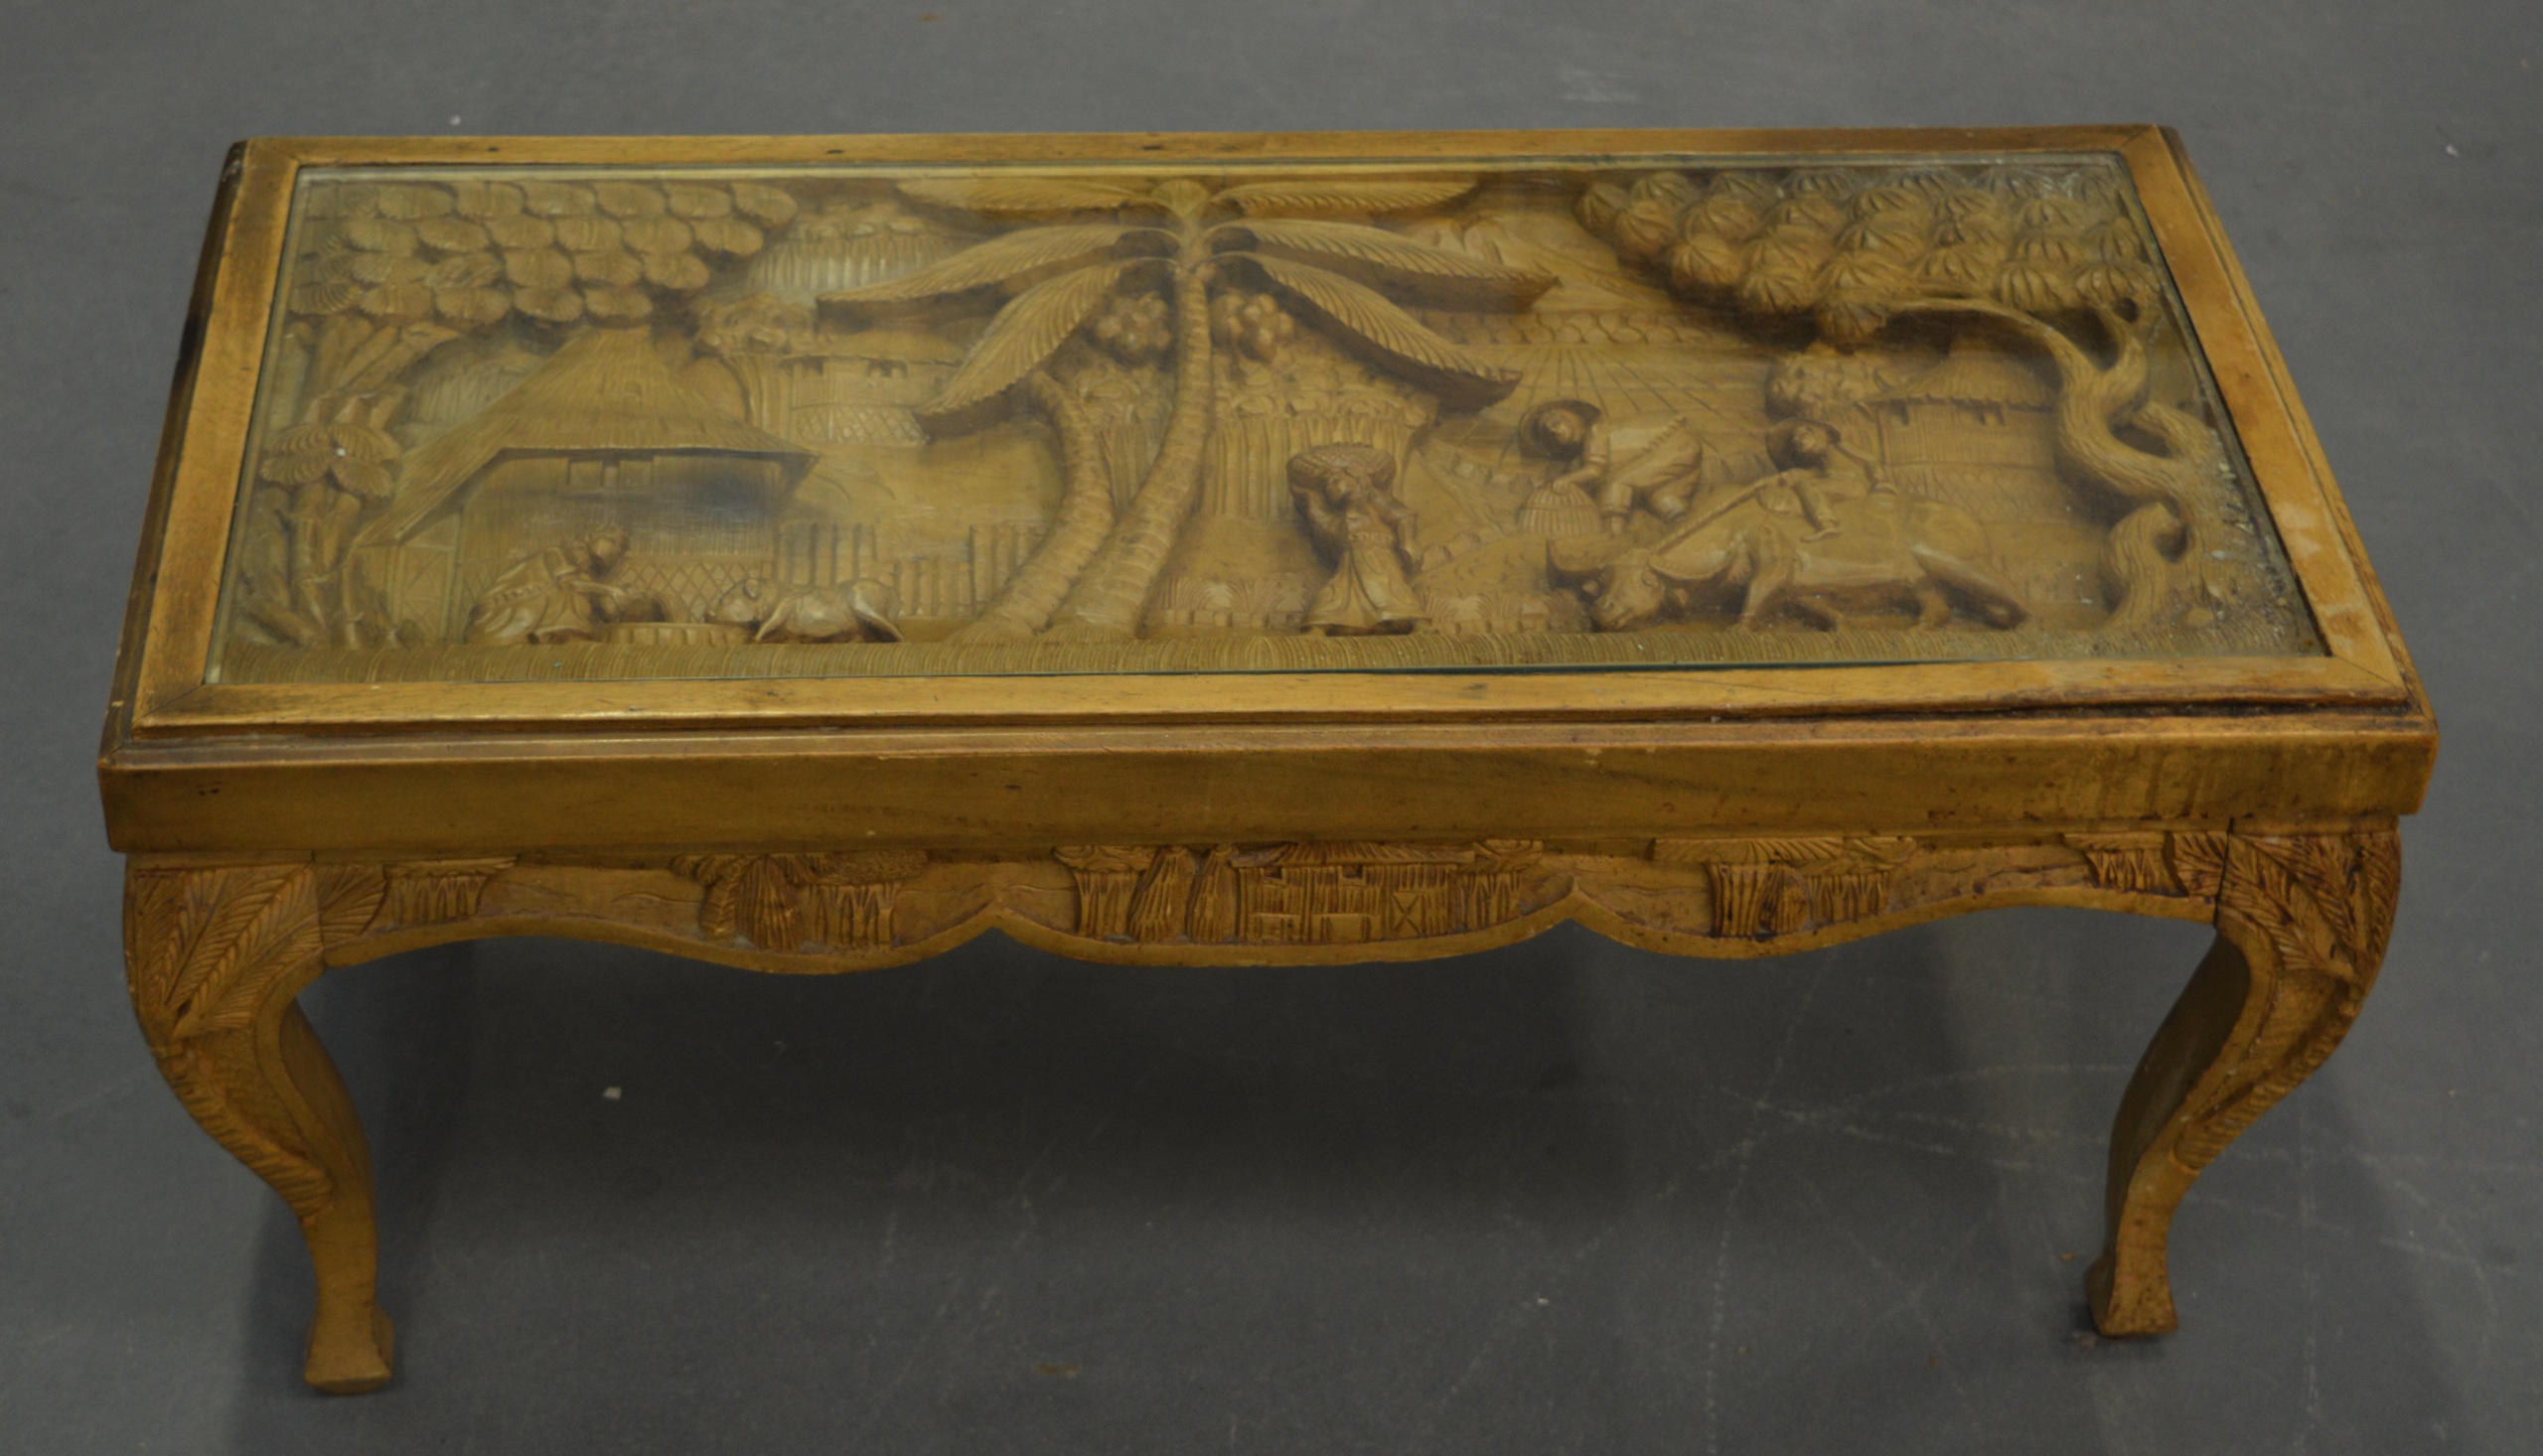 A CARVED HARDWOOD COFFEE TABLE. 3 ft wide.